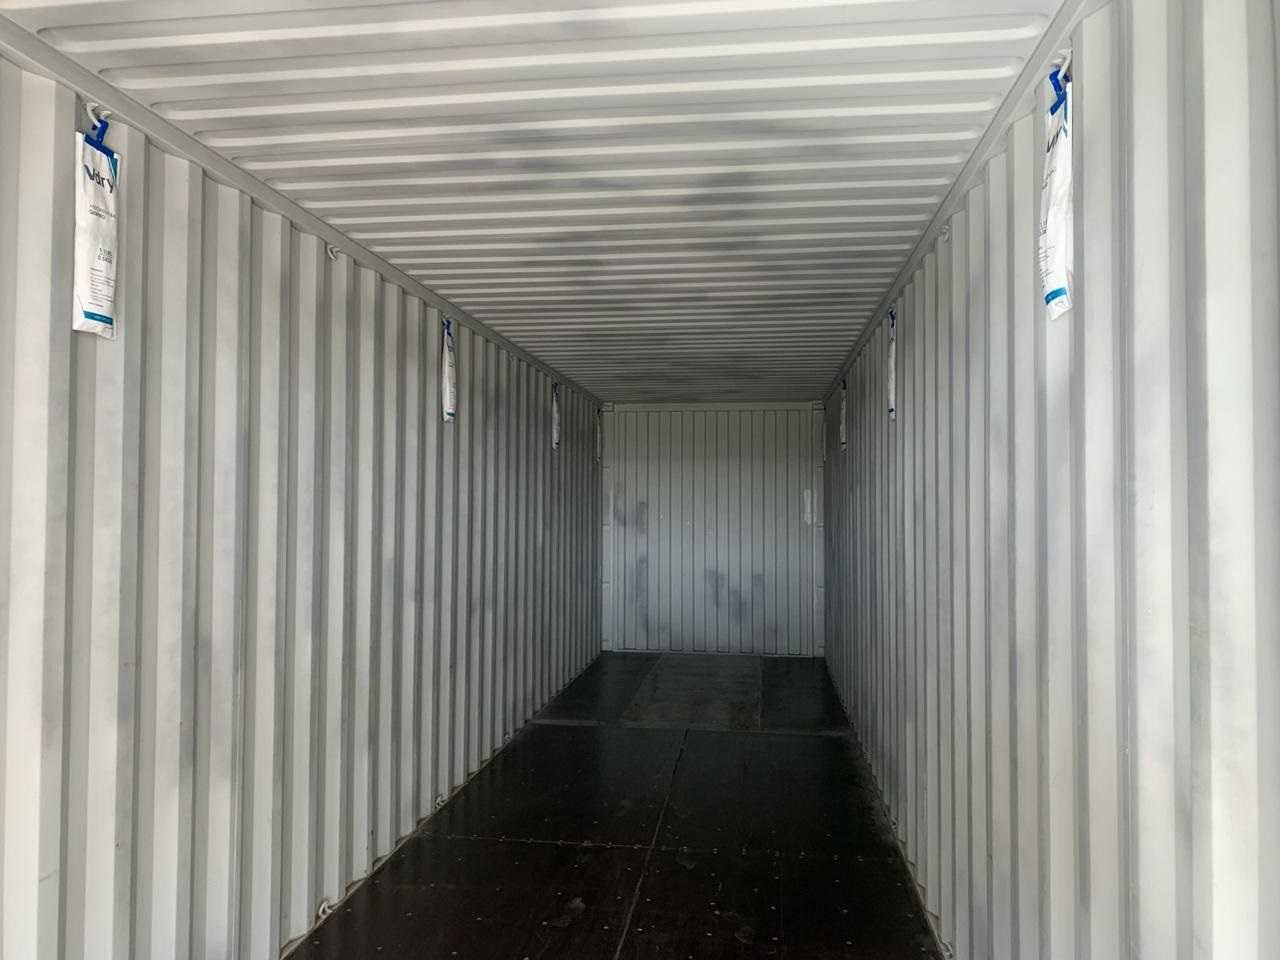 Absorbent (desiccant) which  protect  cargo  from moisture and mold.